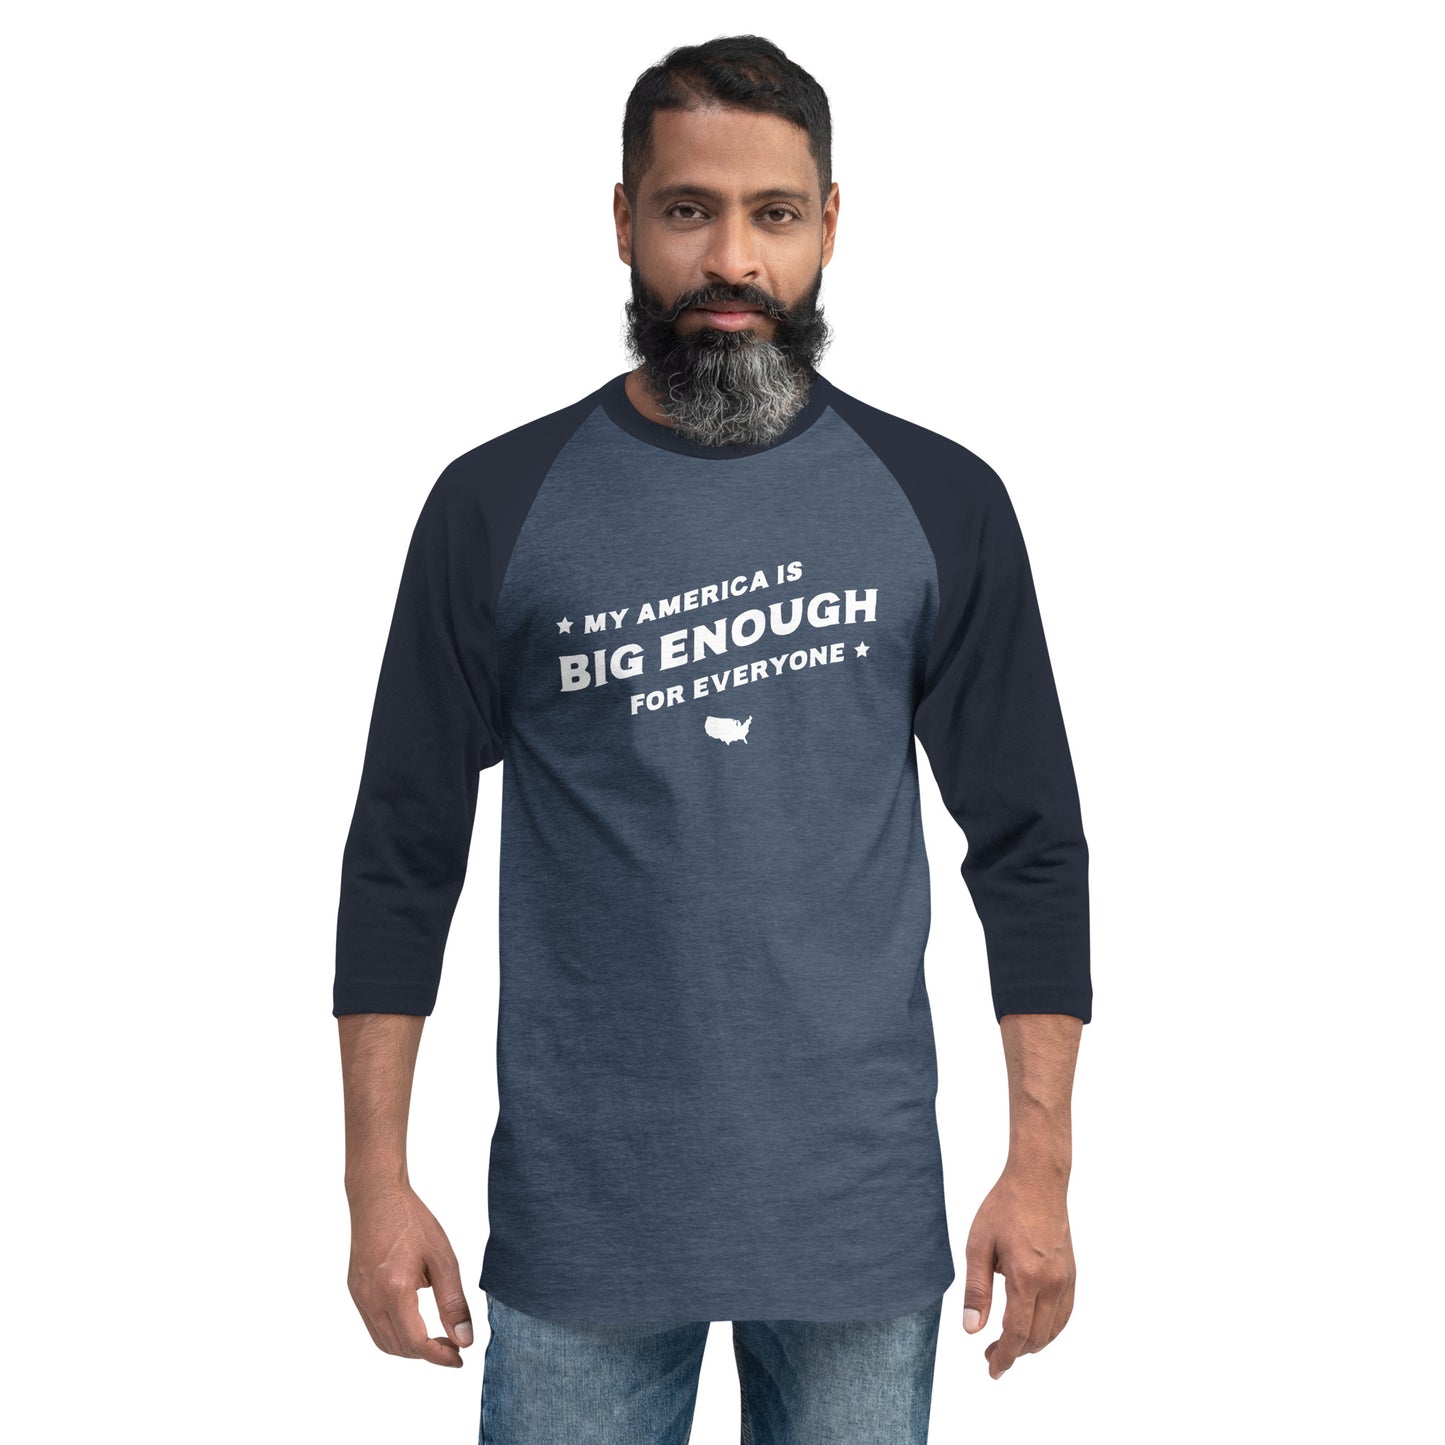 My America is Big Enough for Everyone - 3/4 Sleeve Shirt